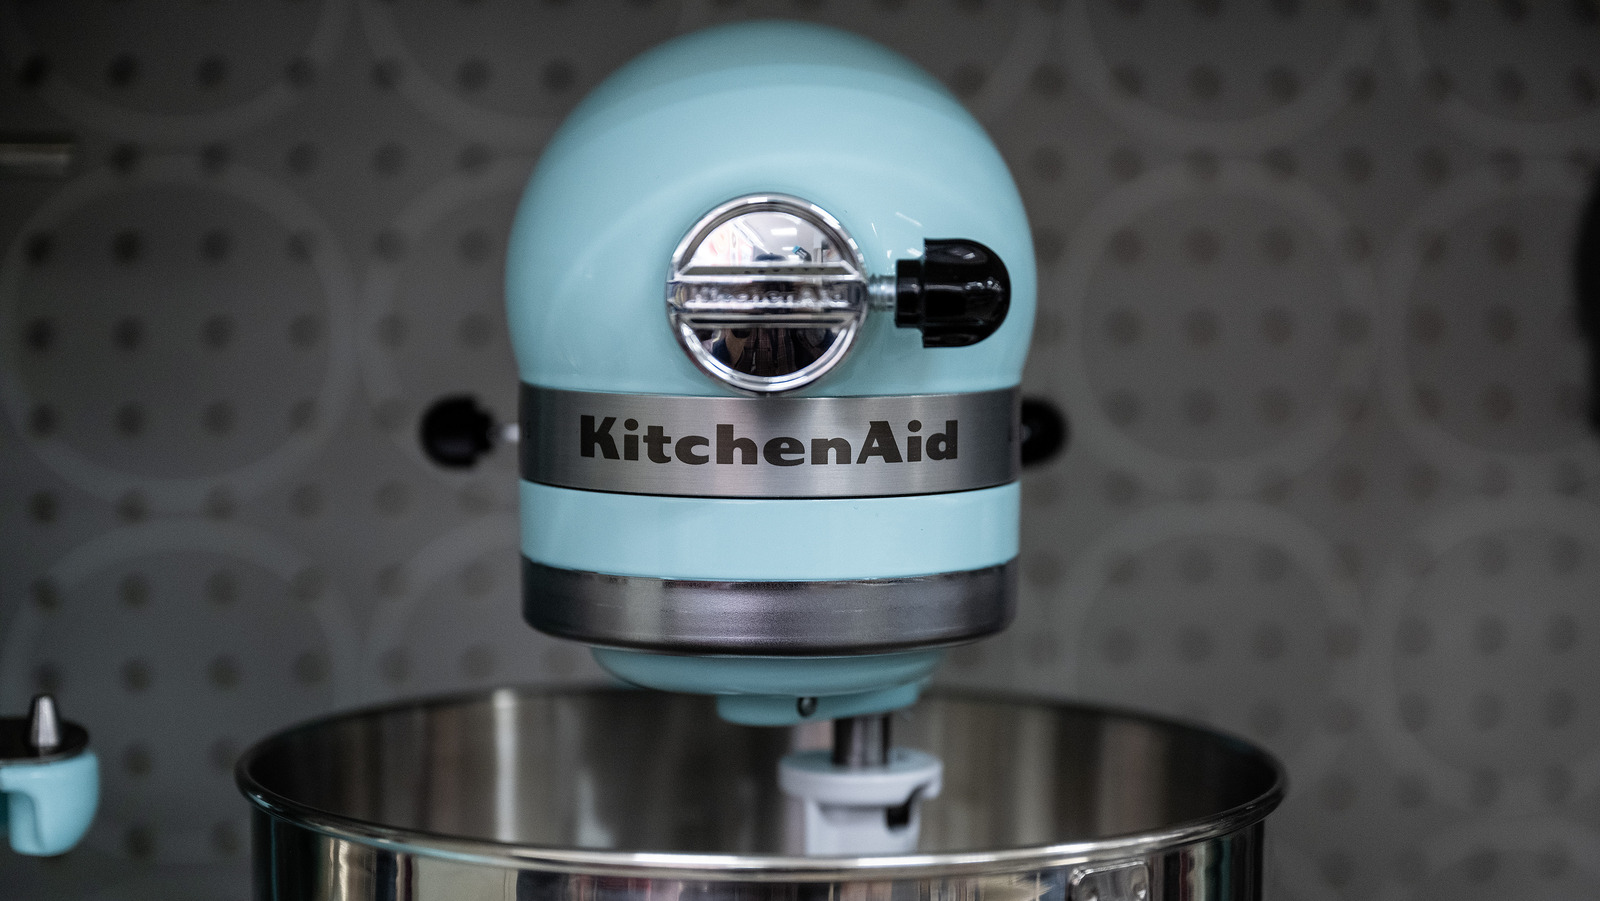 And someone's going to win this too! A look at The KitchenAid